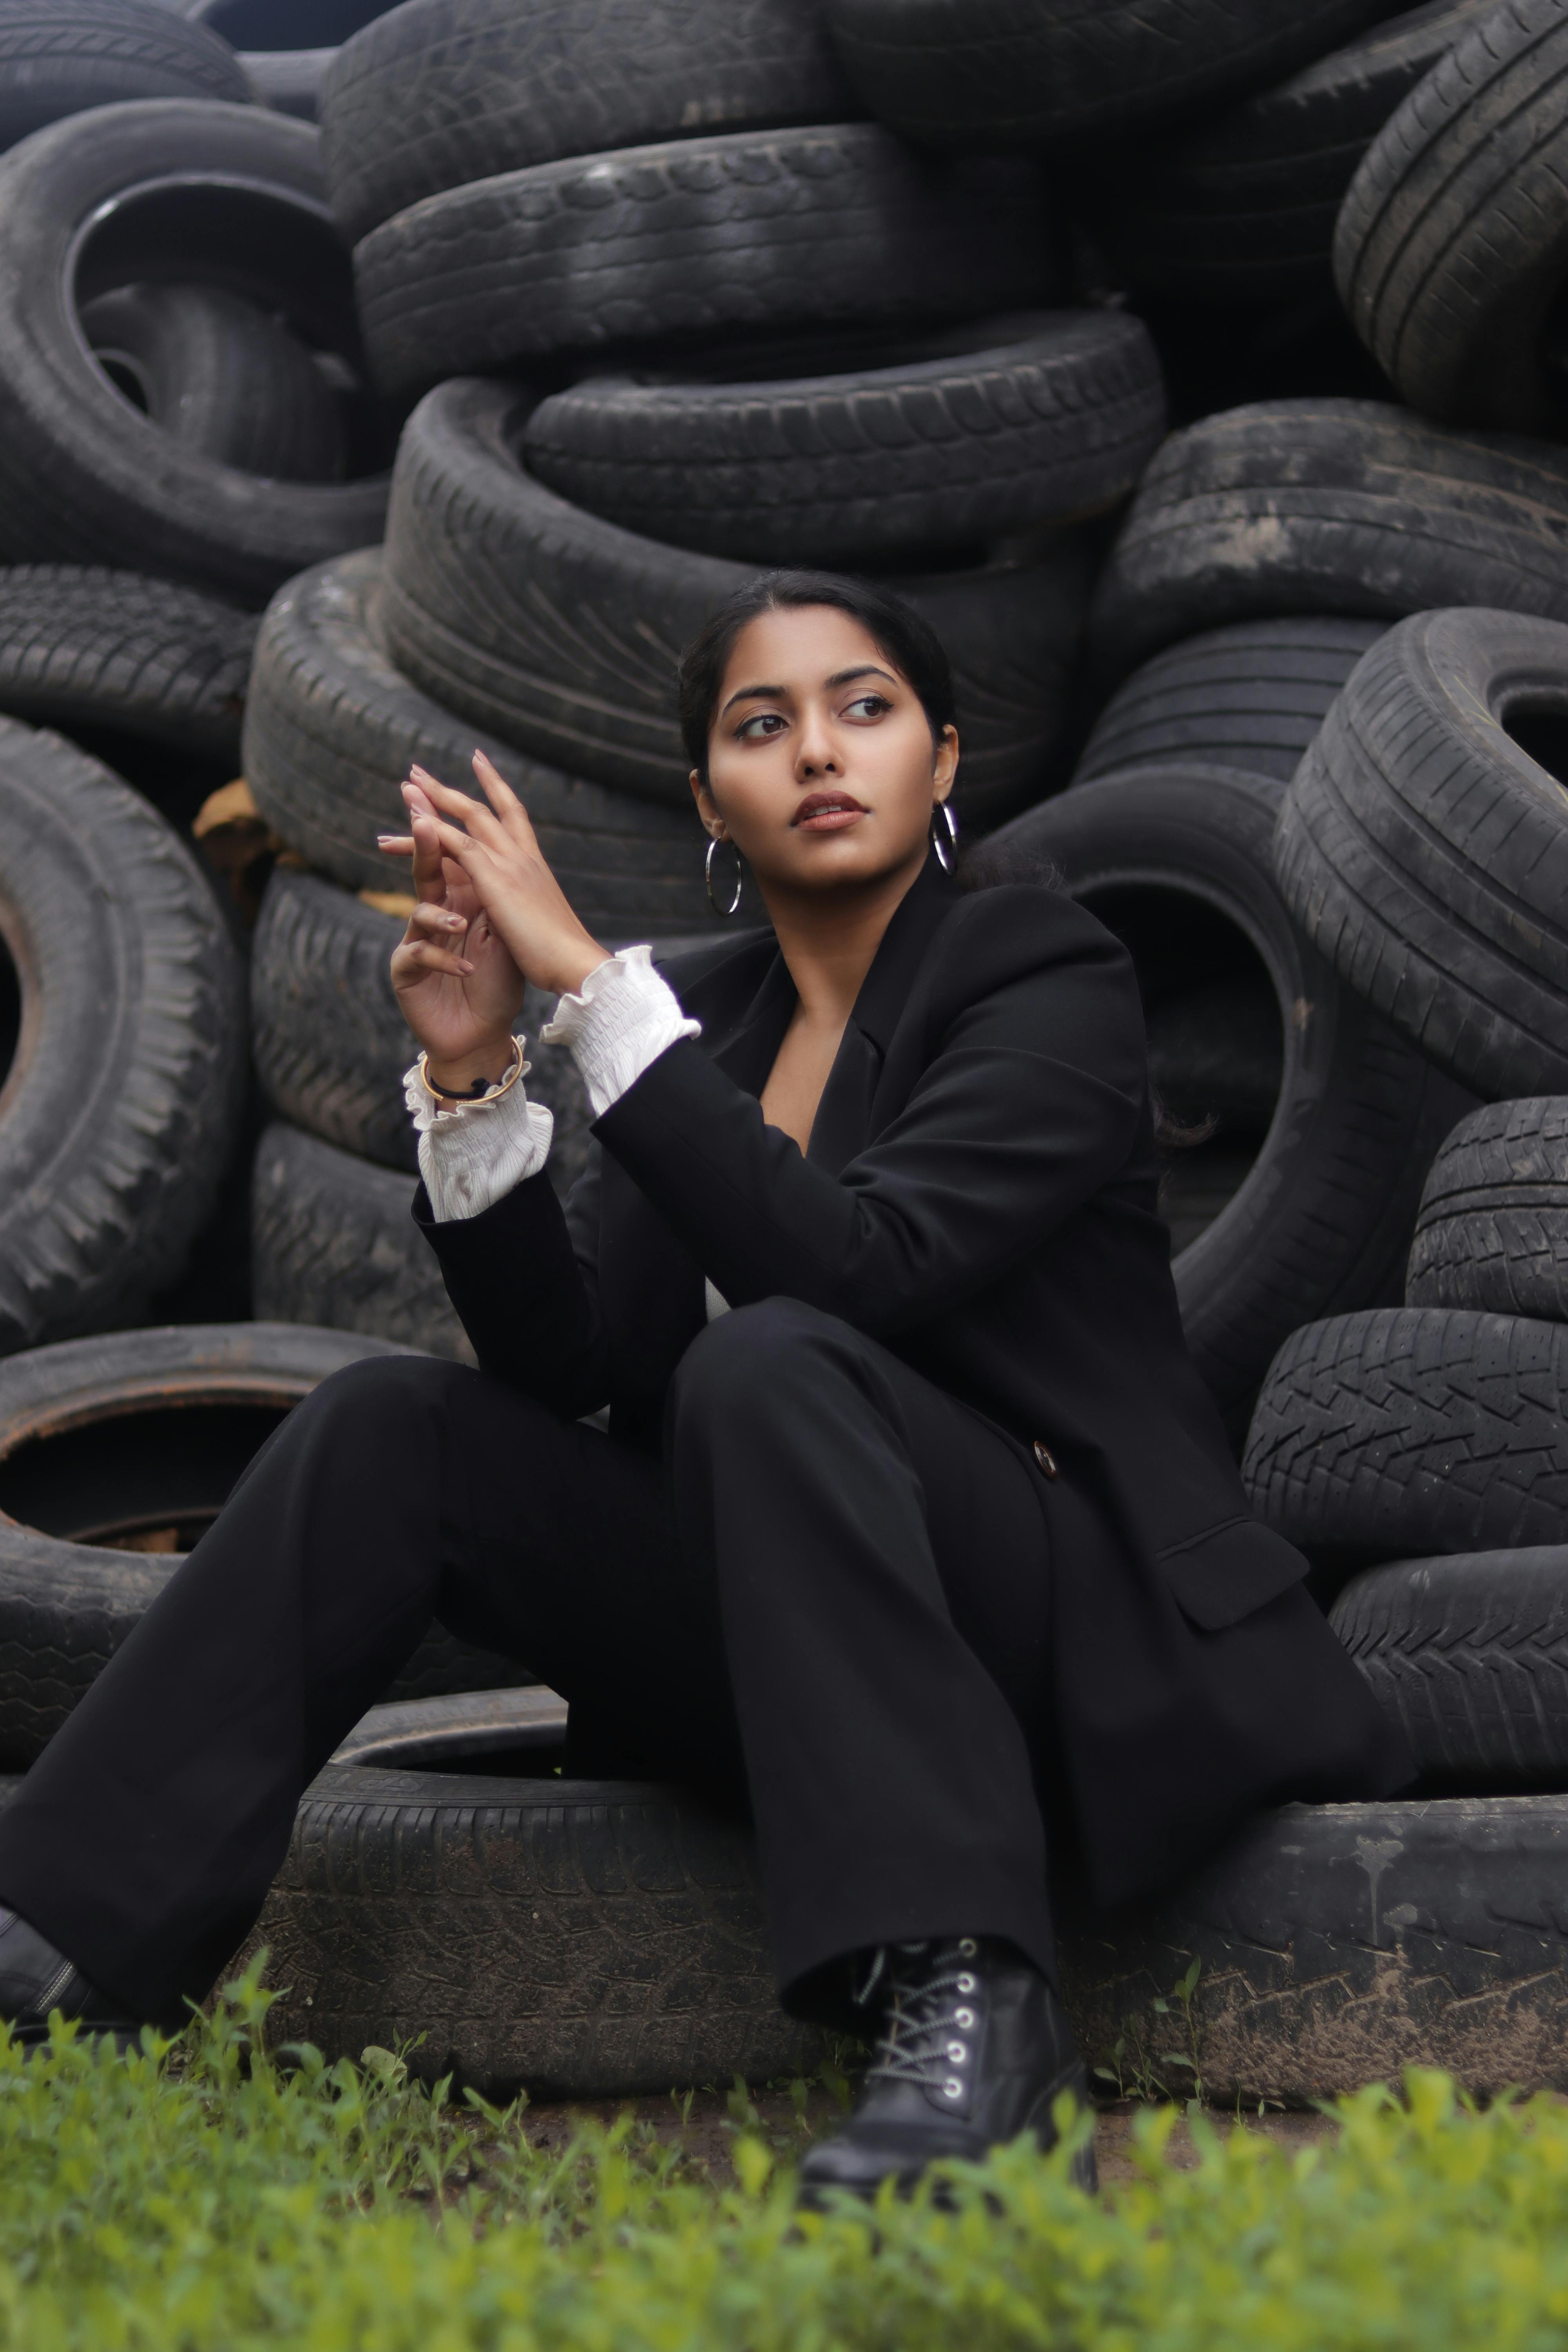 a woman in black blazer and pants sitting on a black tires